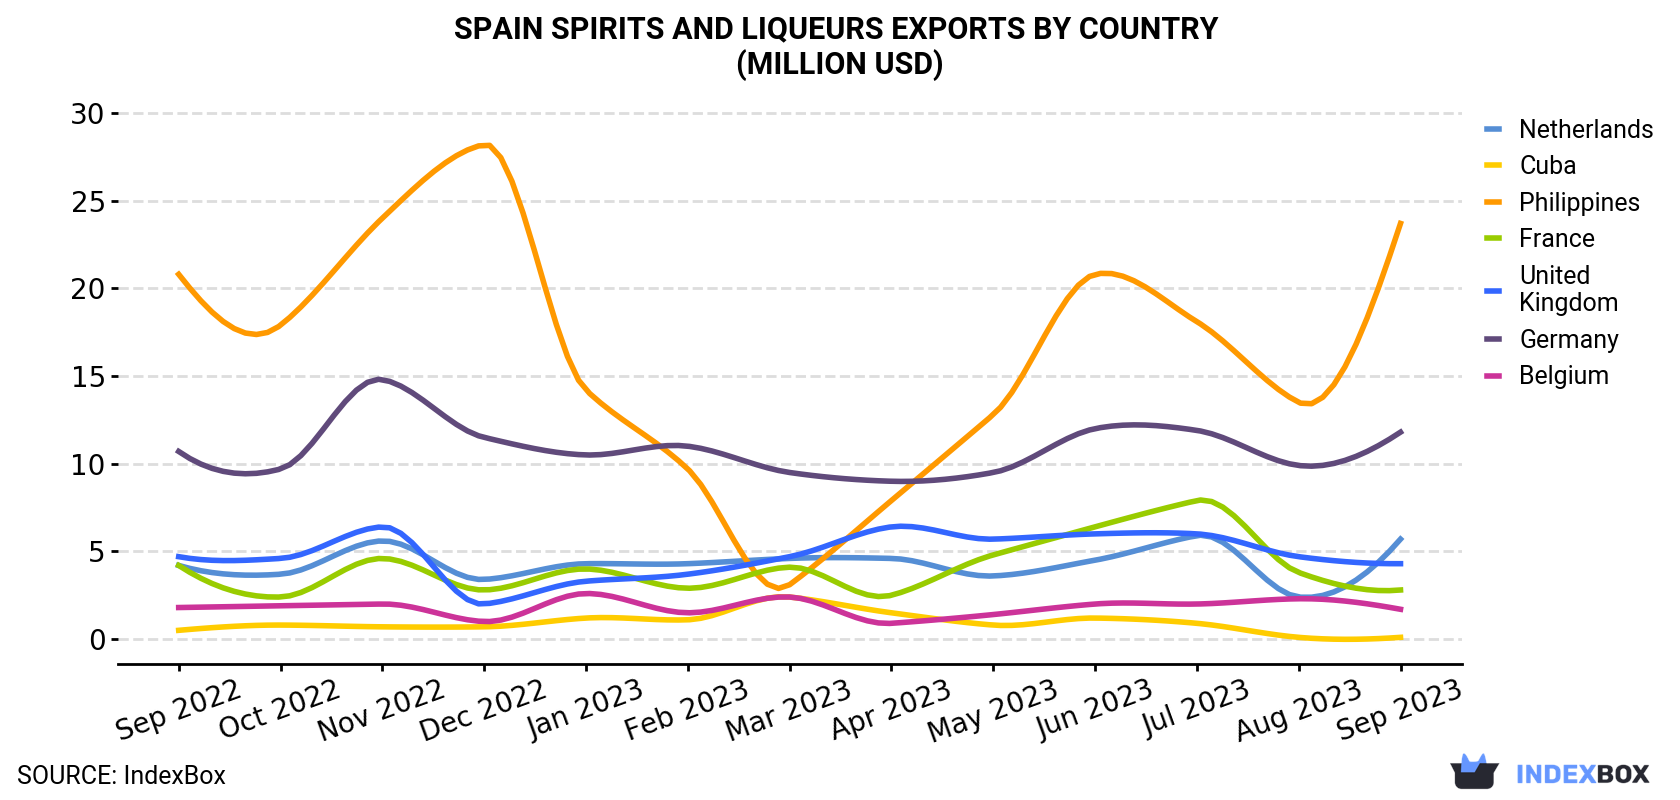 Spain Spirits And Liqueurs Exports By Country (Million USD)